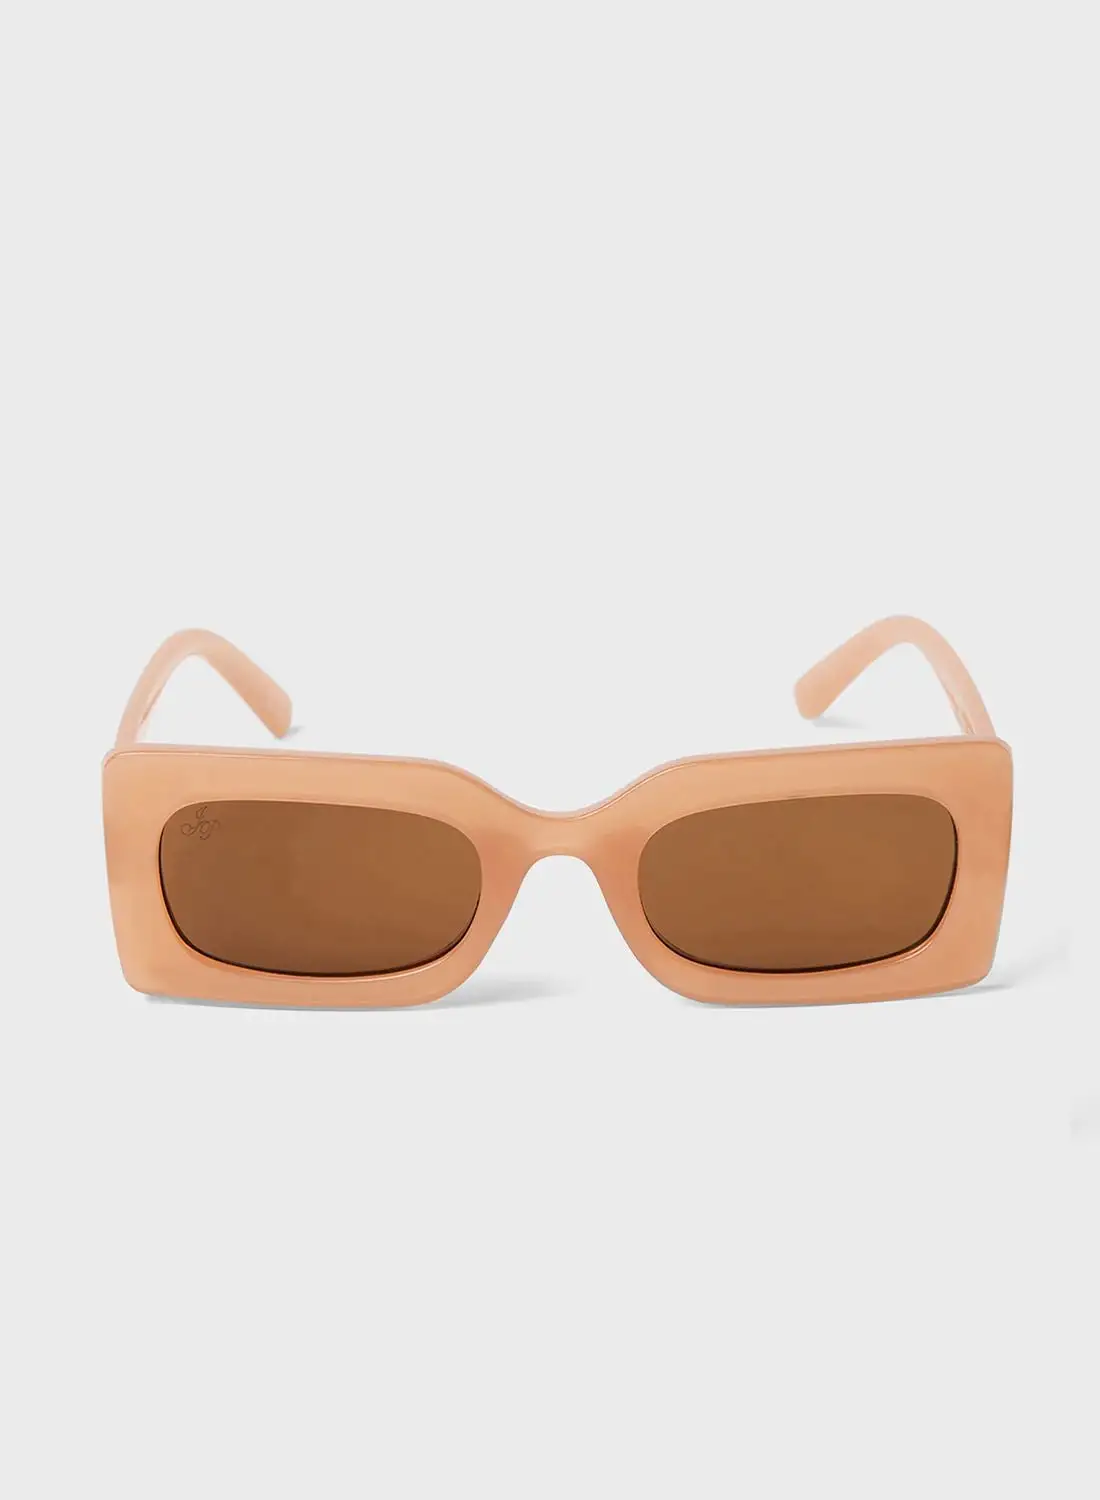 Jeepers Peepers Rectangular Sunglasses